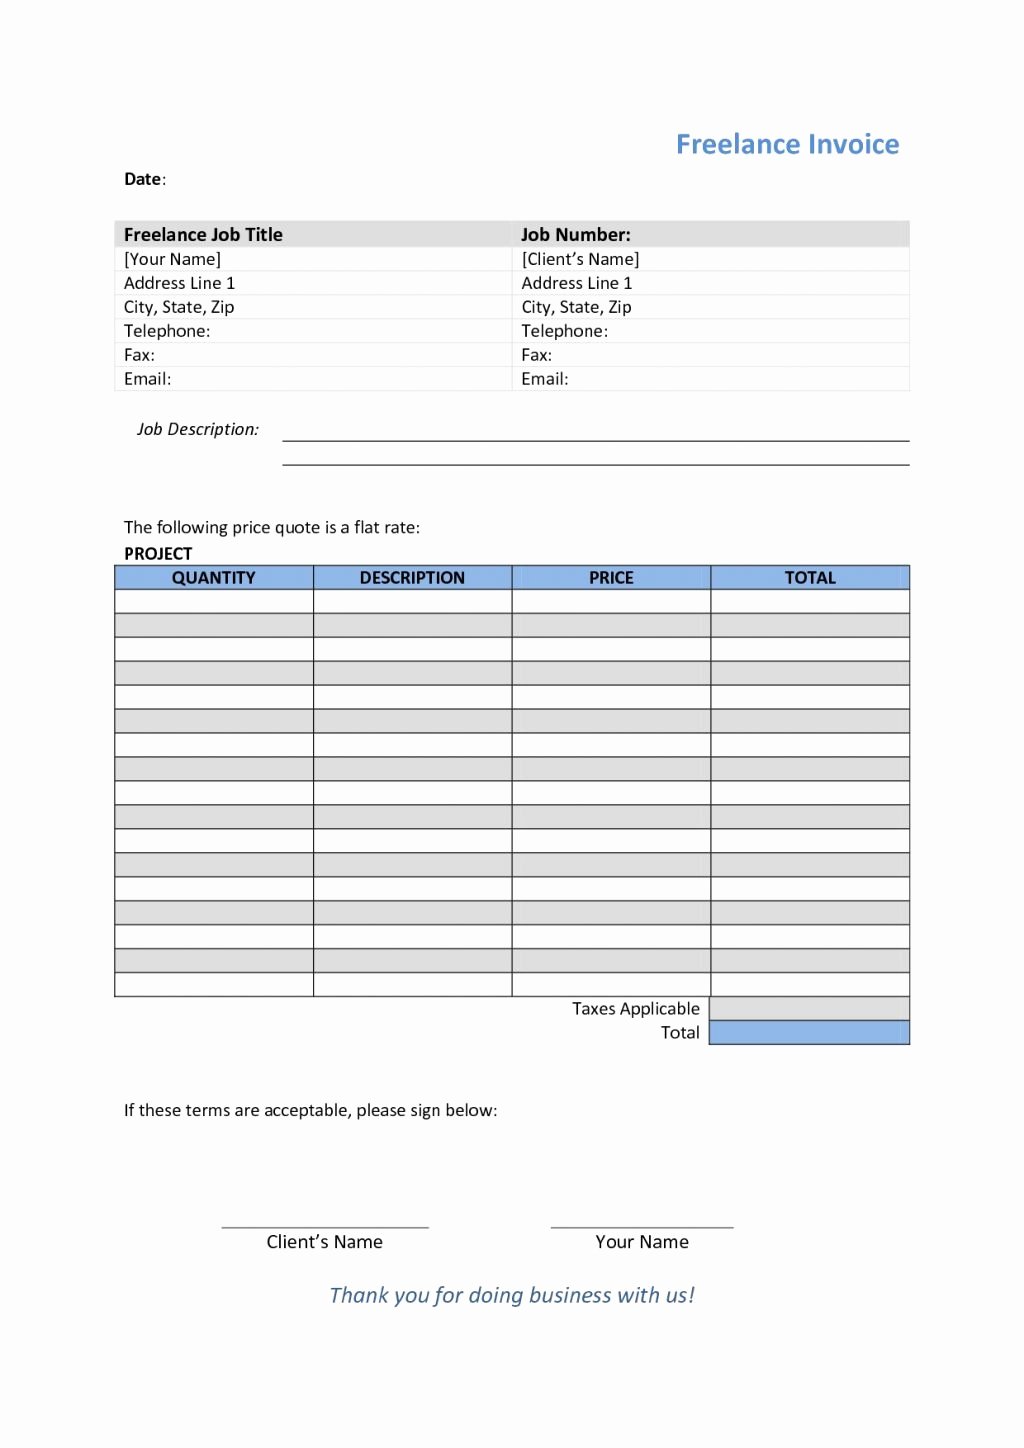 Freelance Writer Invoice Template Awesome Freelance Writer Invoice Invoice Template Ideas